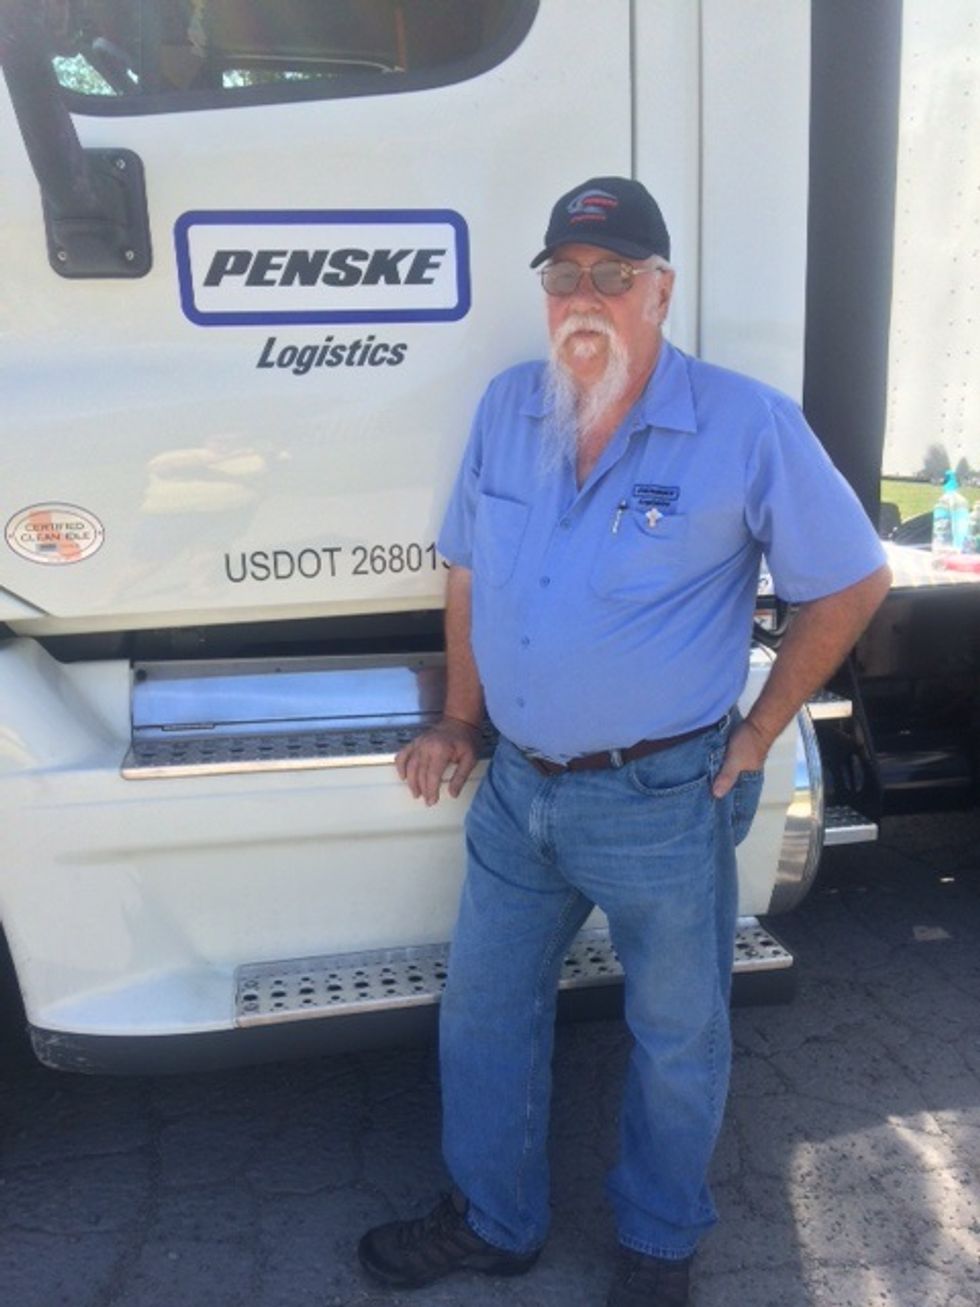 
Truck Driving Pair’s Chance Meeting Leads To 20-Year Love Story
